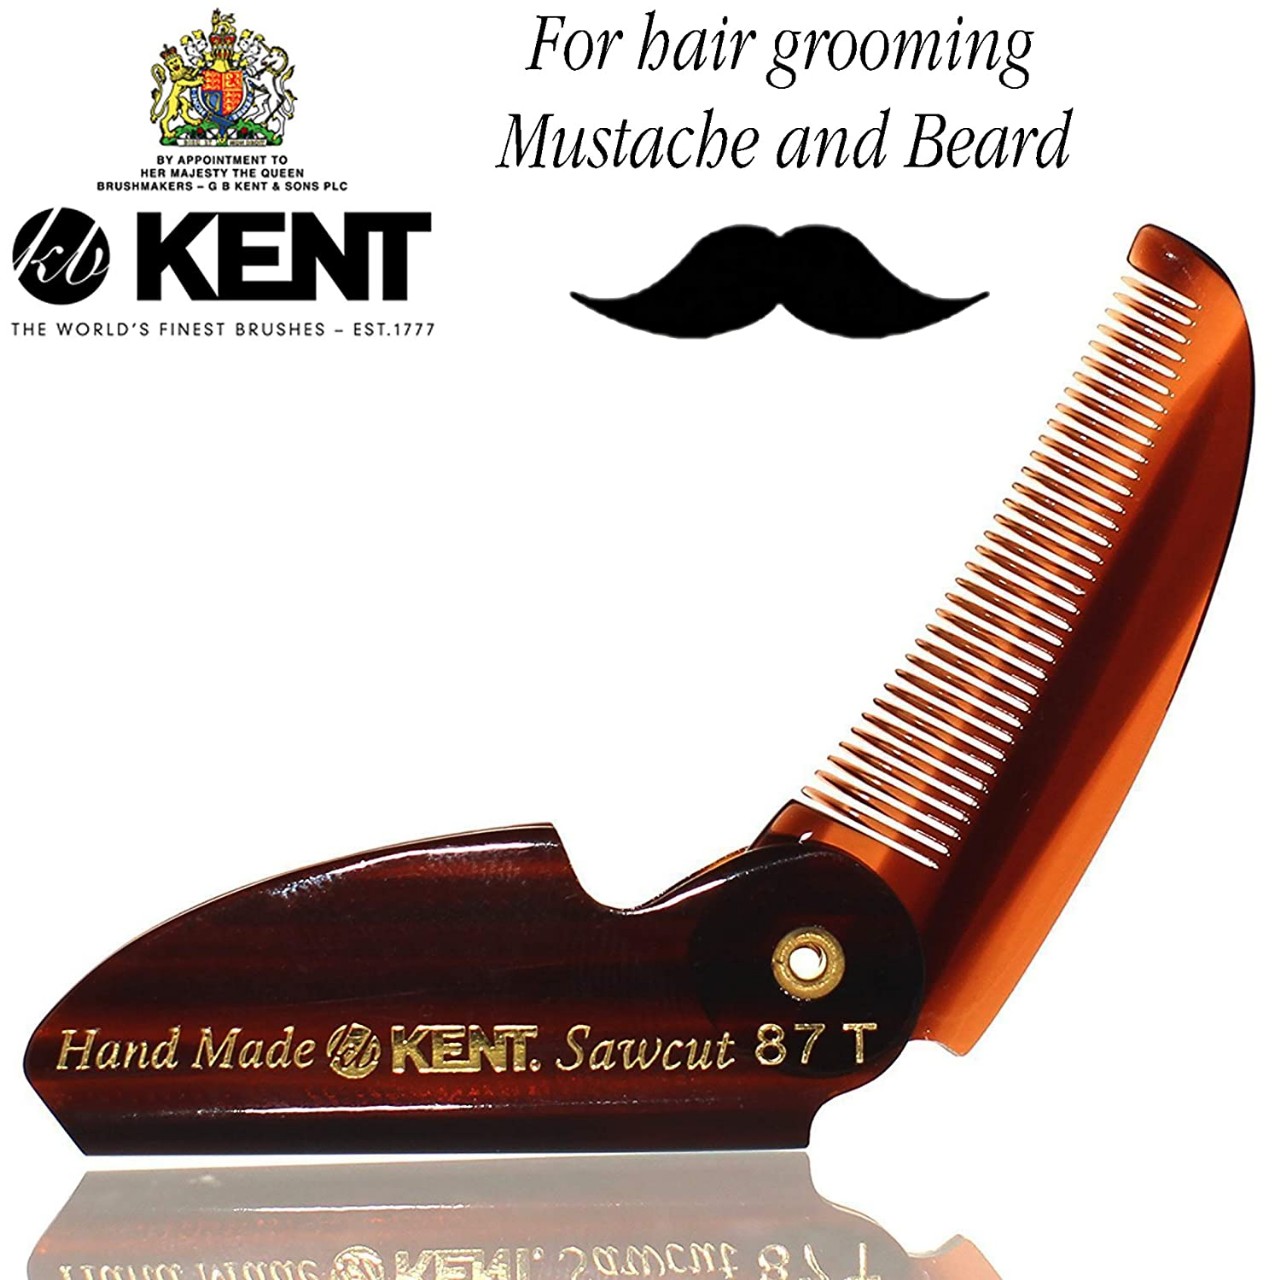 Kent 87T Pocket Comb Beard Comb for Mustache and Beard - Travel Kit Sized Beard Comb for Grooming